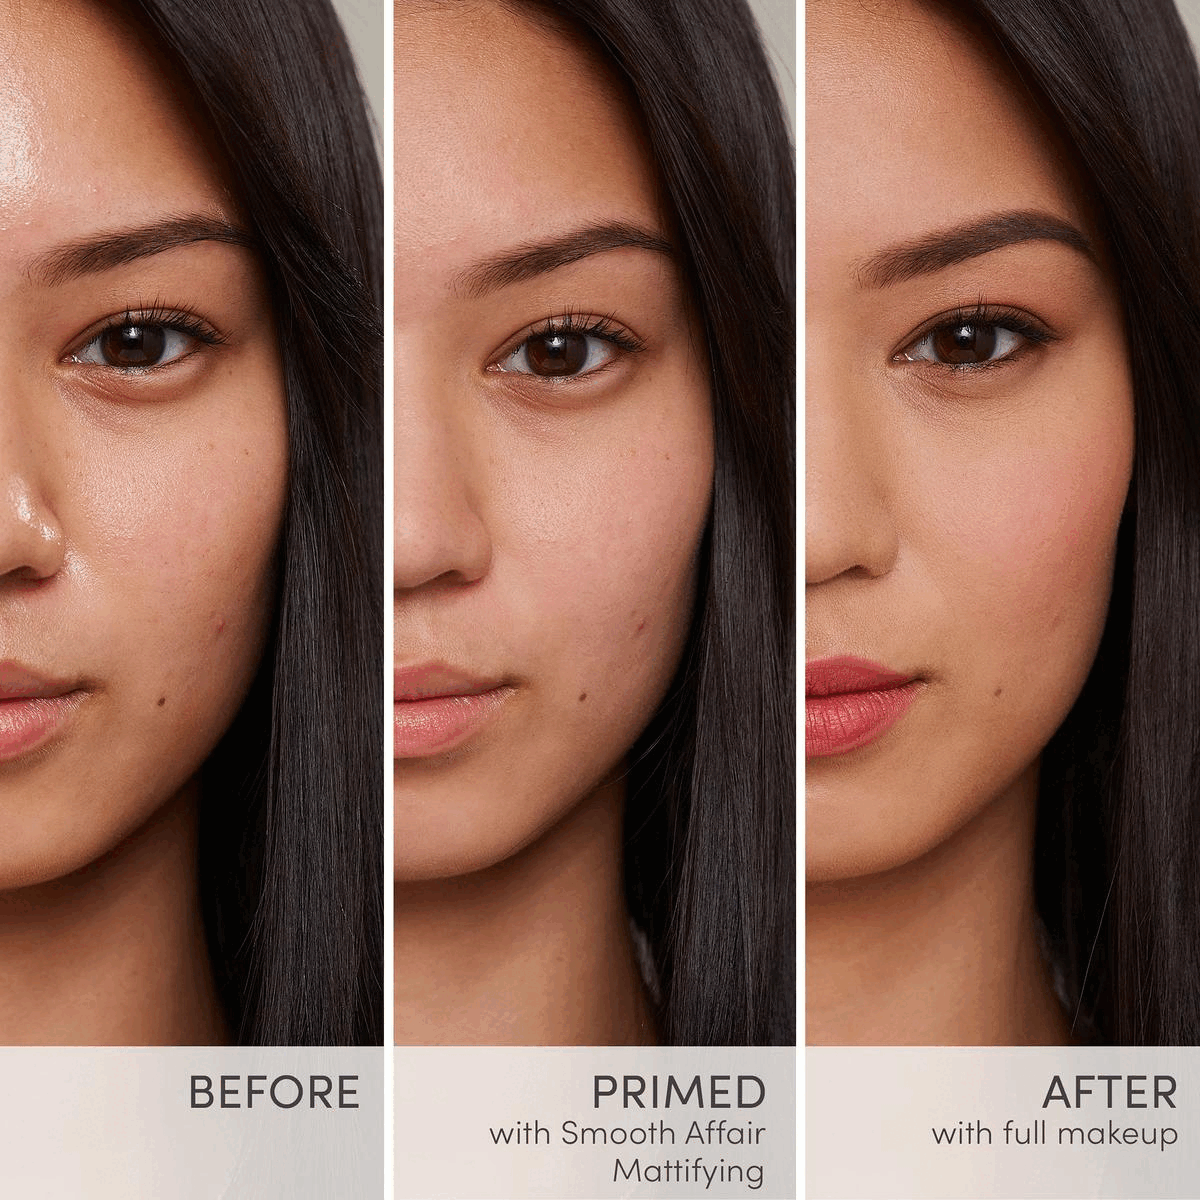 Image 1-2 before and after. Image 3, red algae extract helps regulate sebum production, Hibiscus Bark extract helps support skin elasticity, Rose Geranium Leaf Extract delivers powerful antioxidant protection. Image 4, find your primer. Image 5, skincare makeup system = prep, perfect and set.